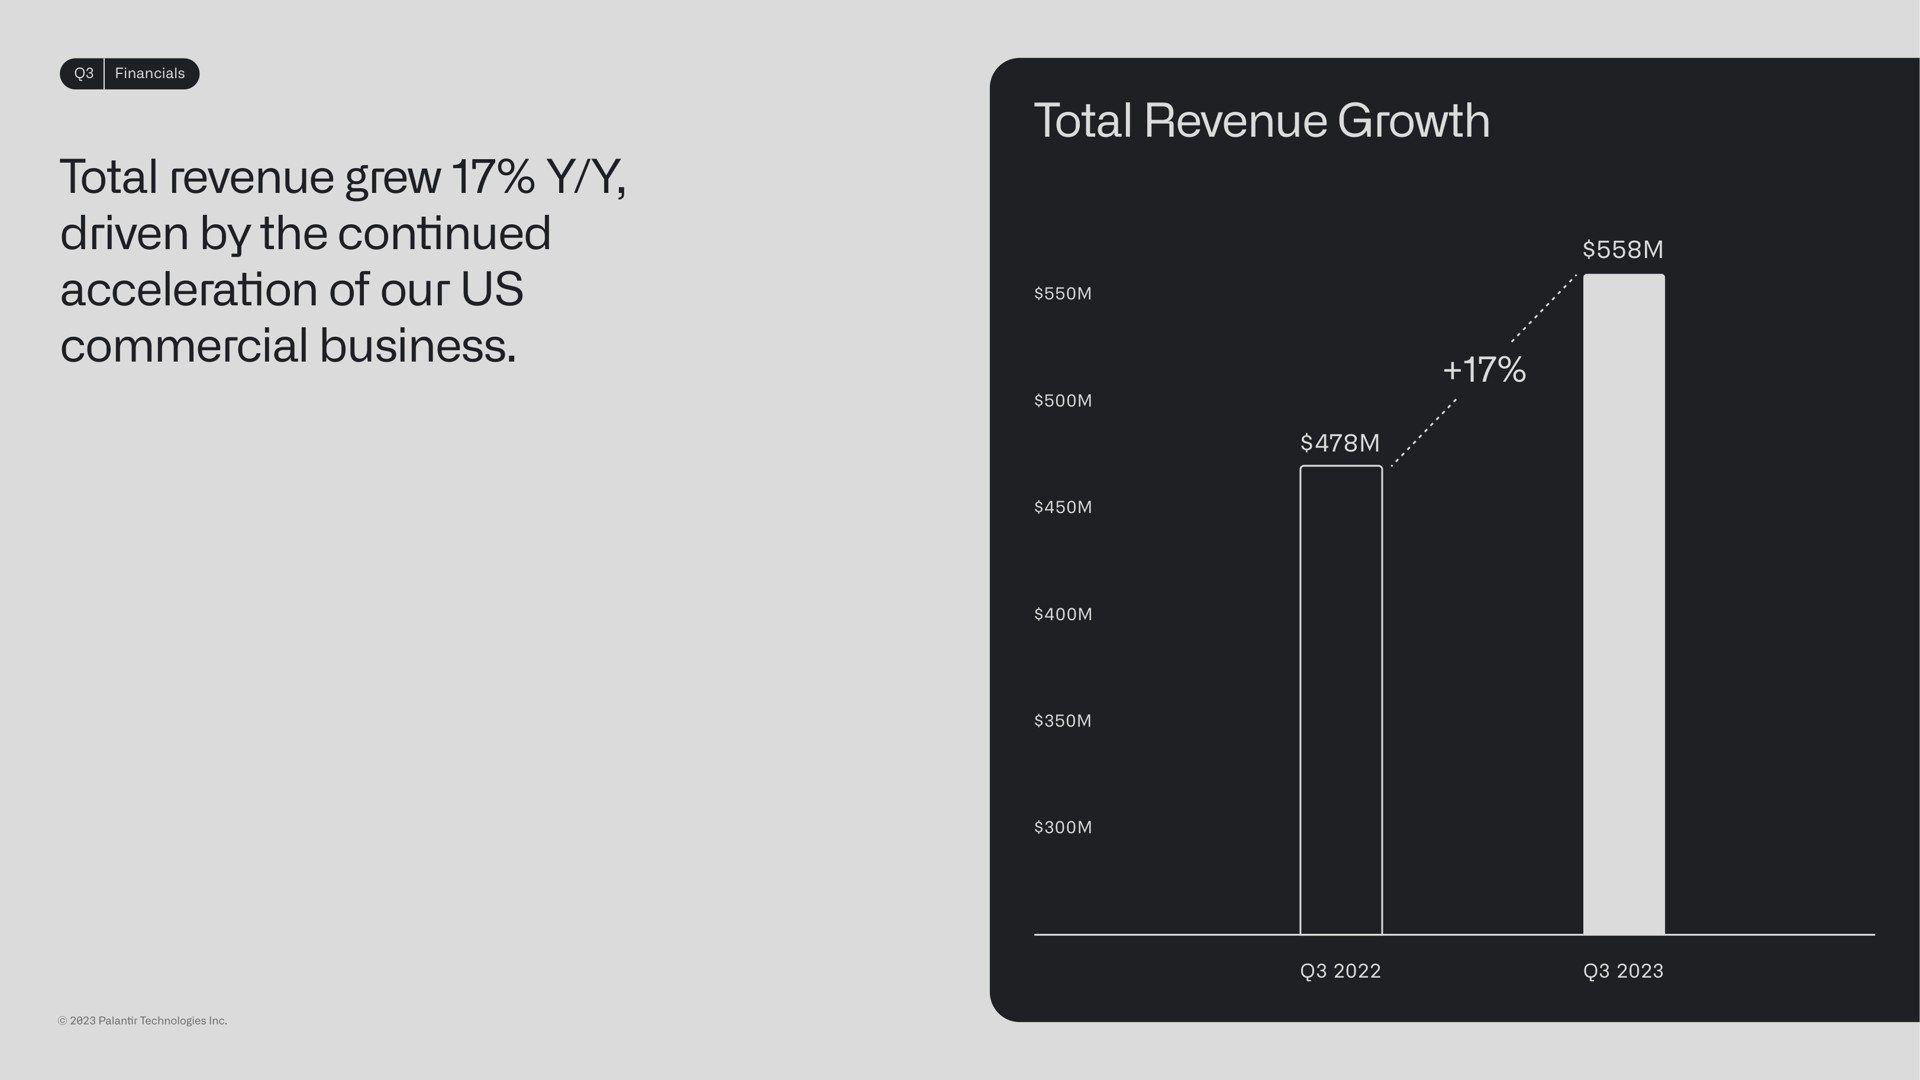 total revenue grew driven by the continued acceleration of our us commercial business total revenue growth | Palantir